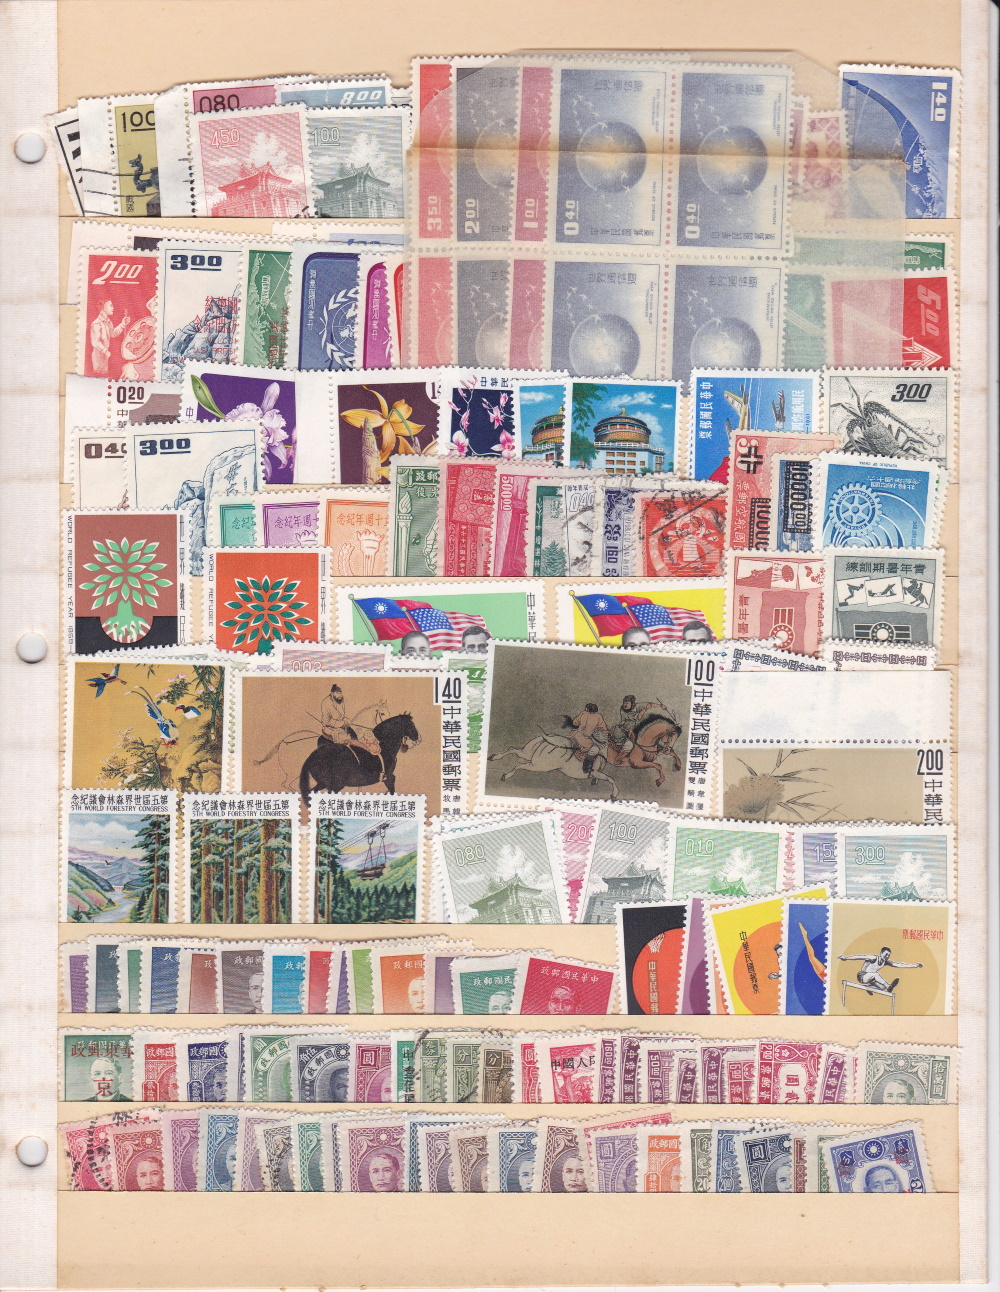 US & Foreign postage stamps, 23 pages